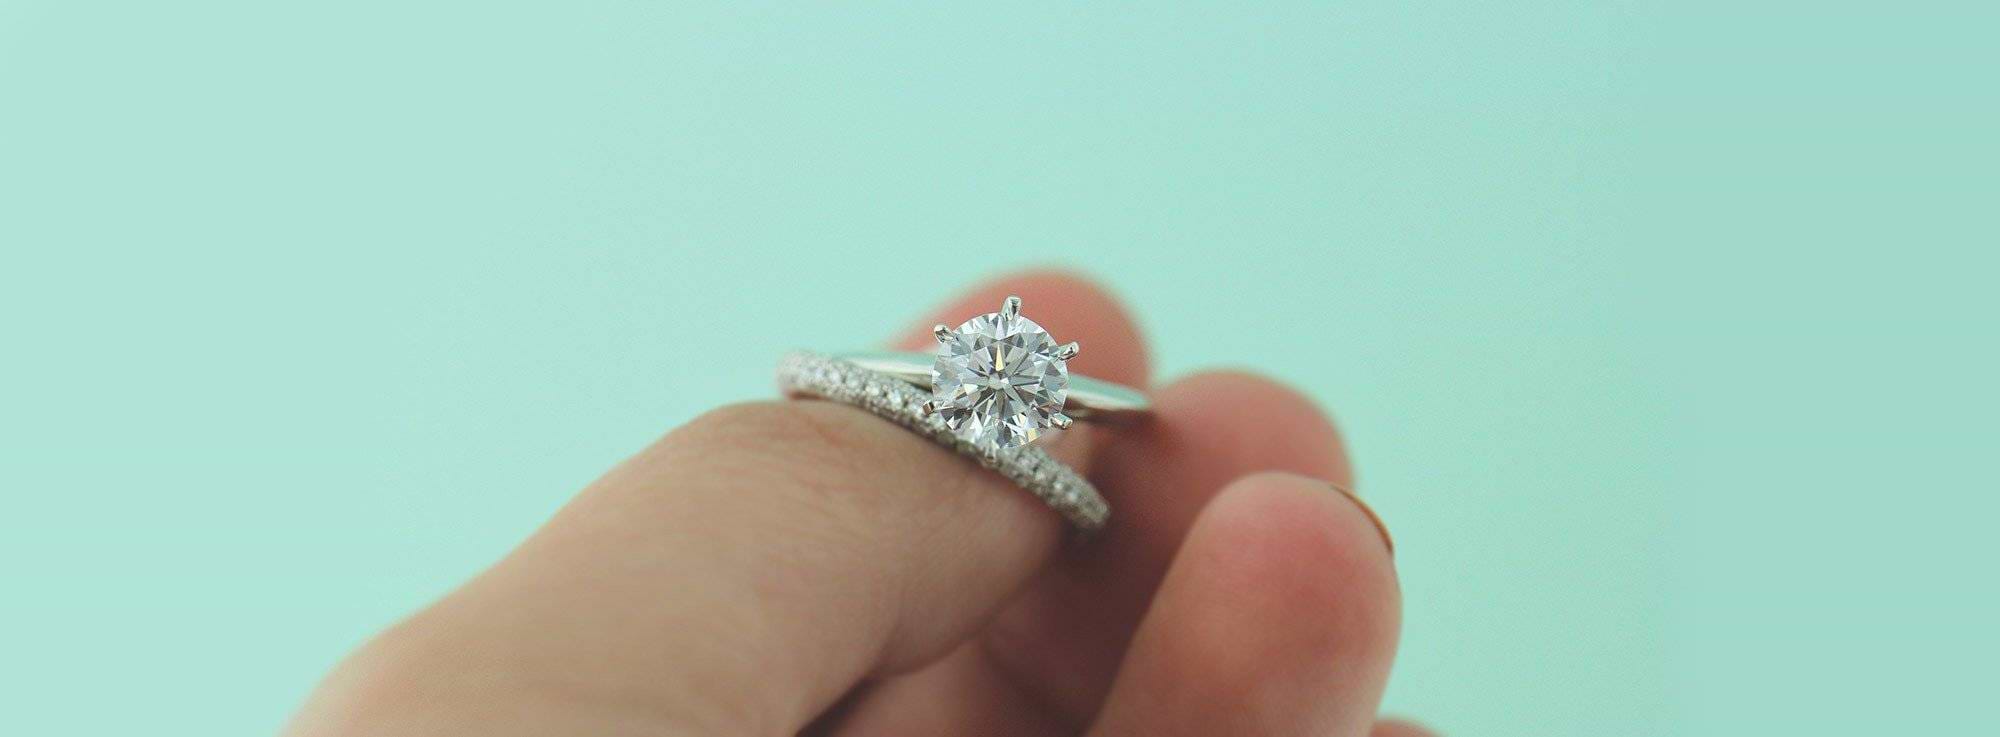 8 Wedding Bands to Pair with Your Traditional Engagement Ring